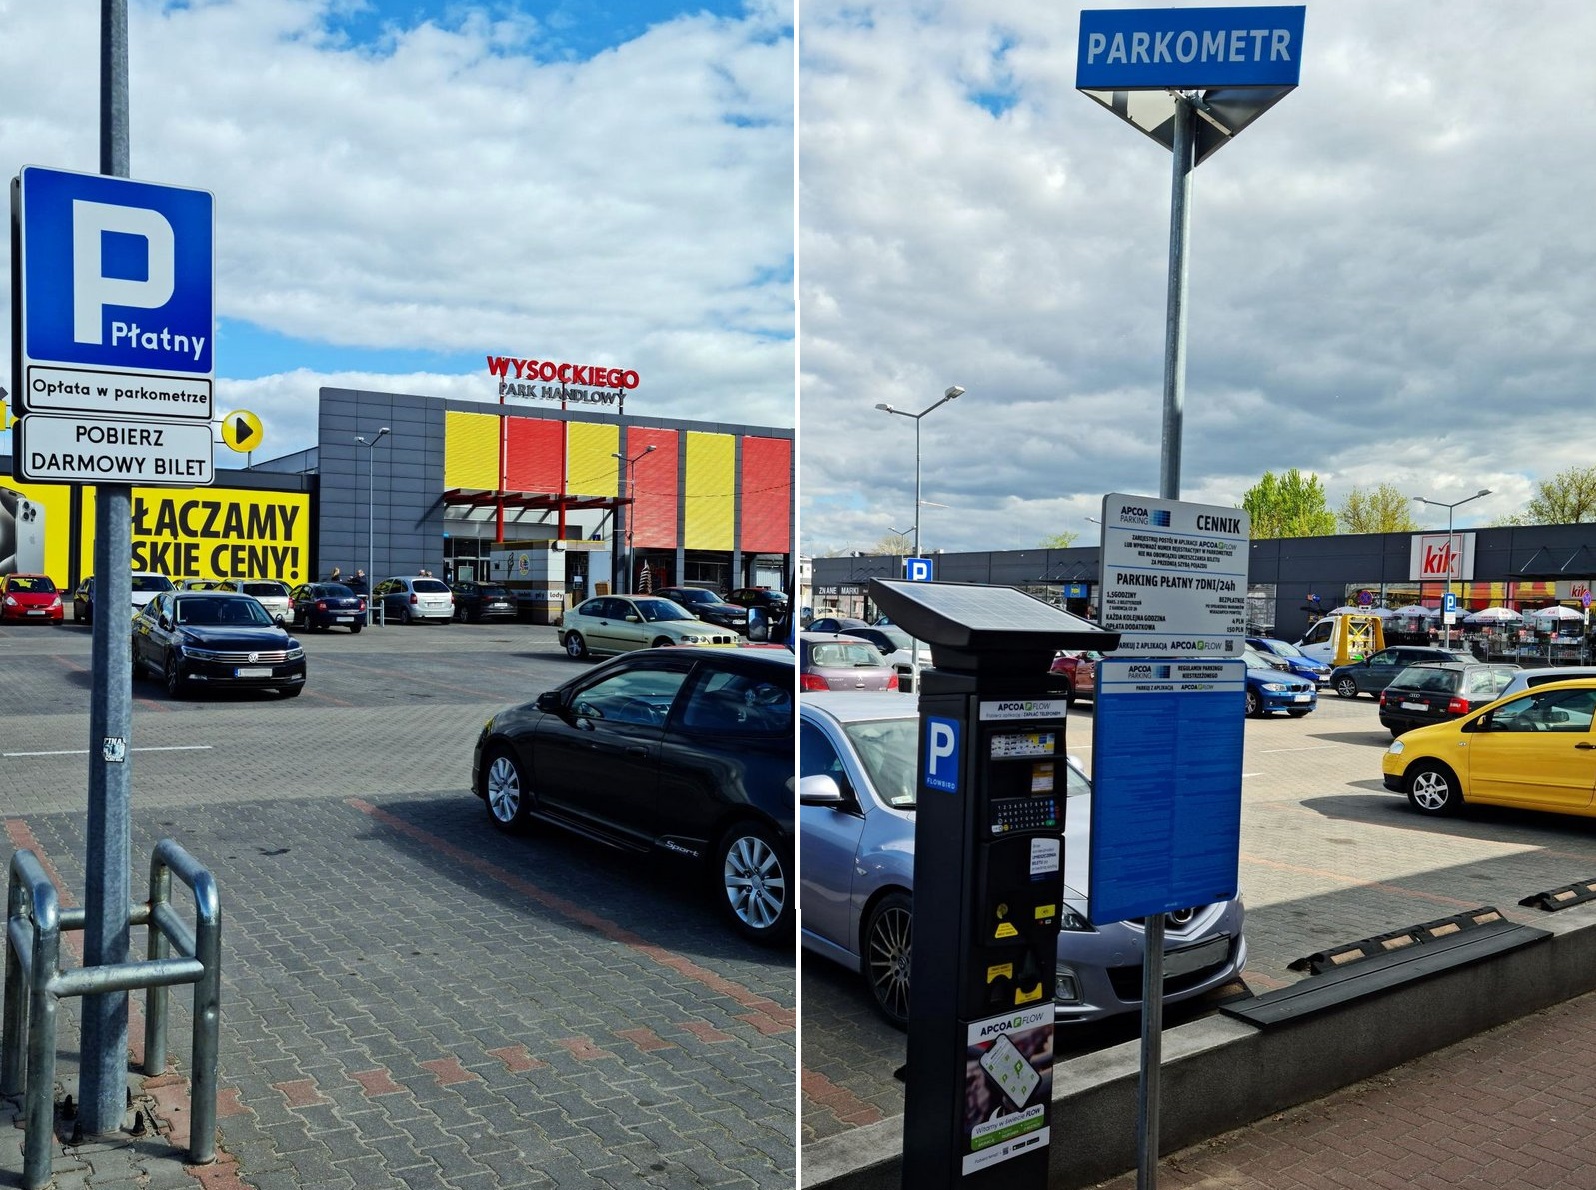 APCOA Polska provided the facility with eight modern pay and display machines.